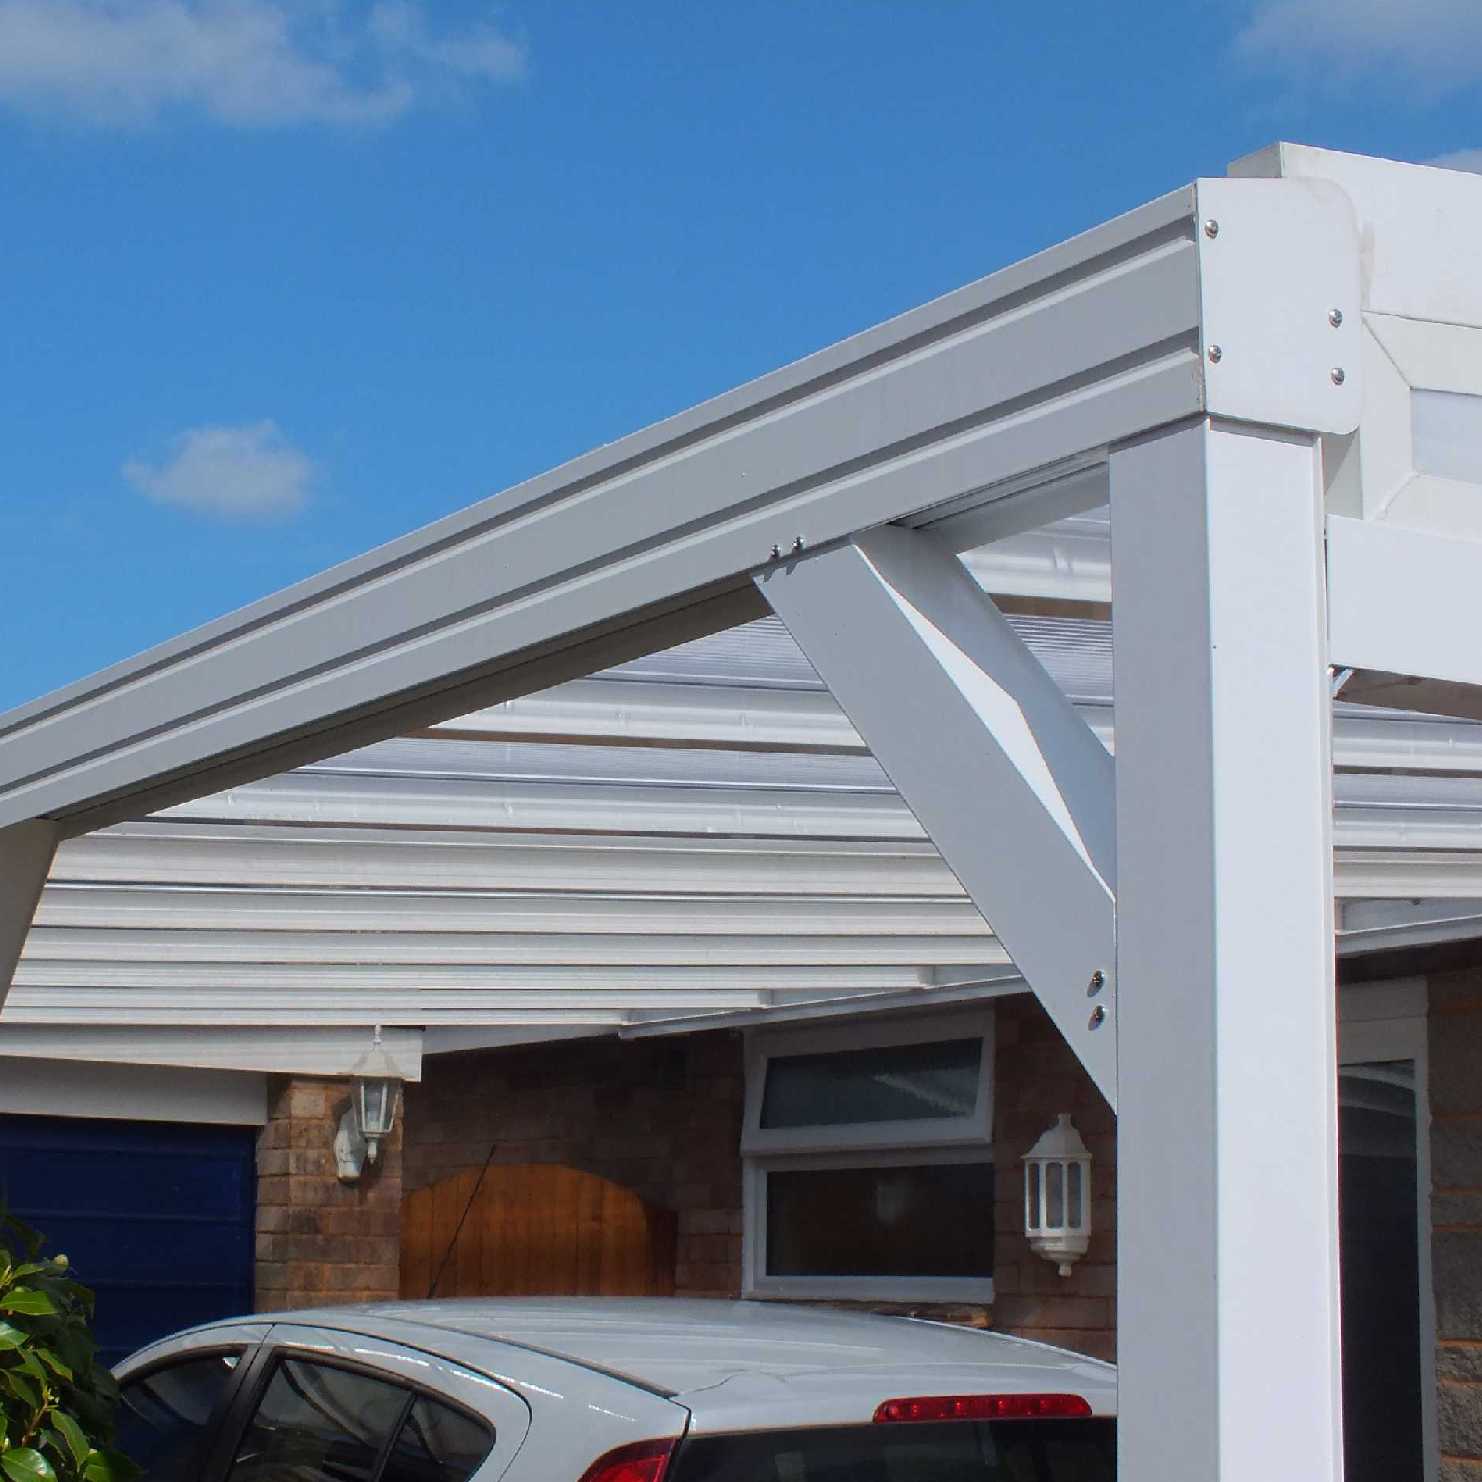 Great deals on Omega Smart Lean-To Canopy, White with 16mm Polycarbonate Glazing - 3.1m (W) x 2.0m (P), (2) Supporting Posts